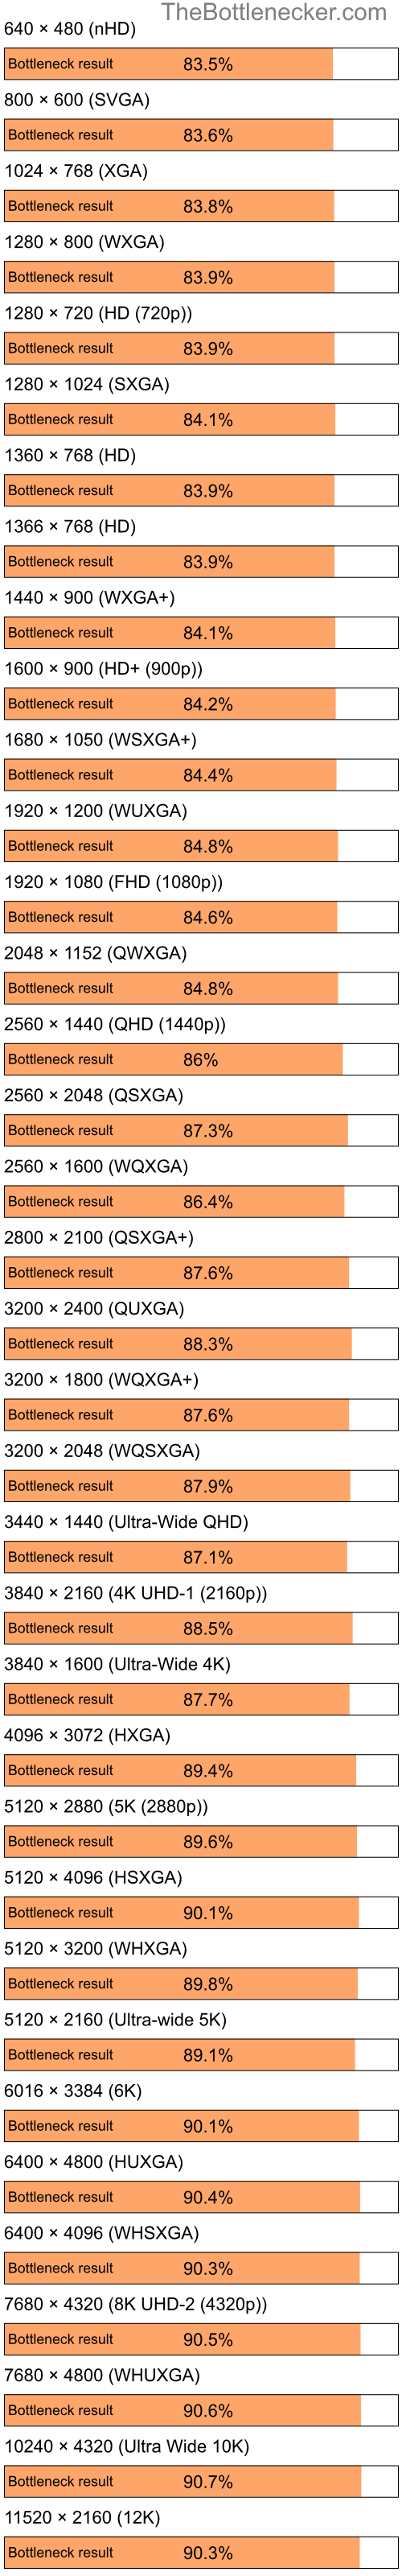 Bottleneck results by resolution for Intel Atom Z520 and AMD Radeon 9600 Family in Graphic Card Intense Tasks